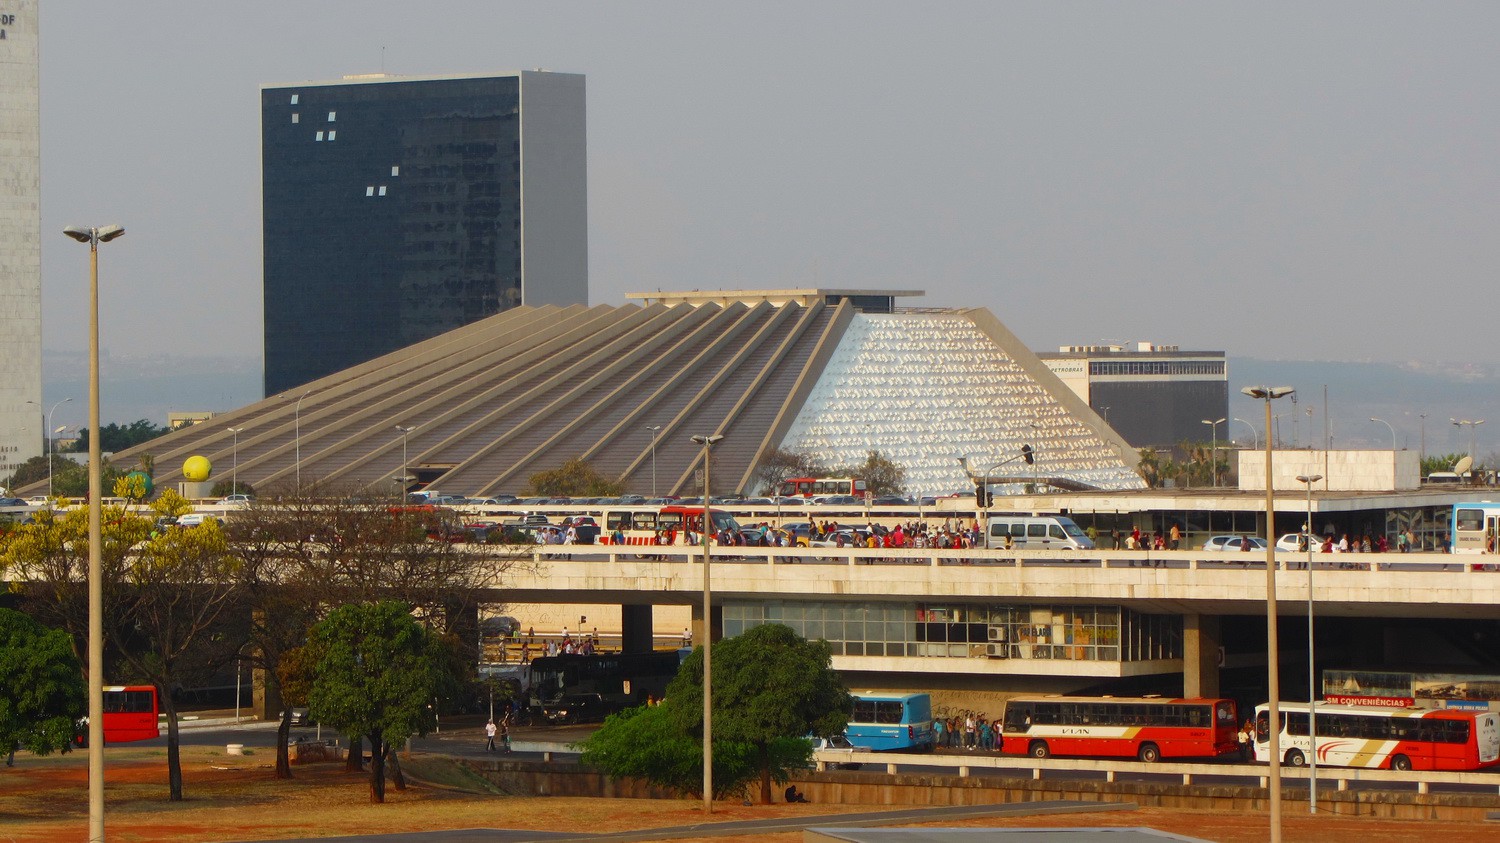 Opera and central bus station of Brasilia